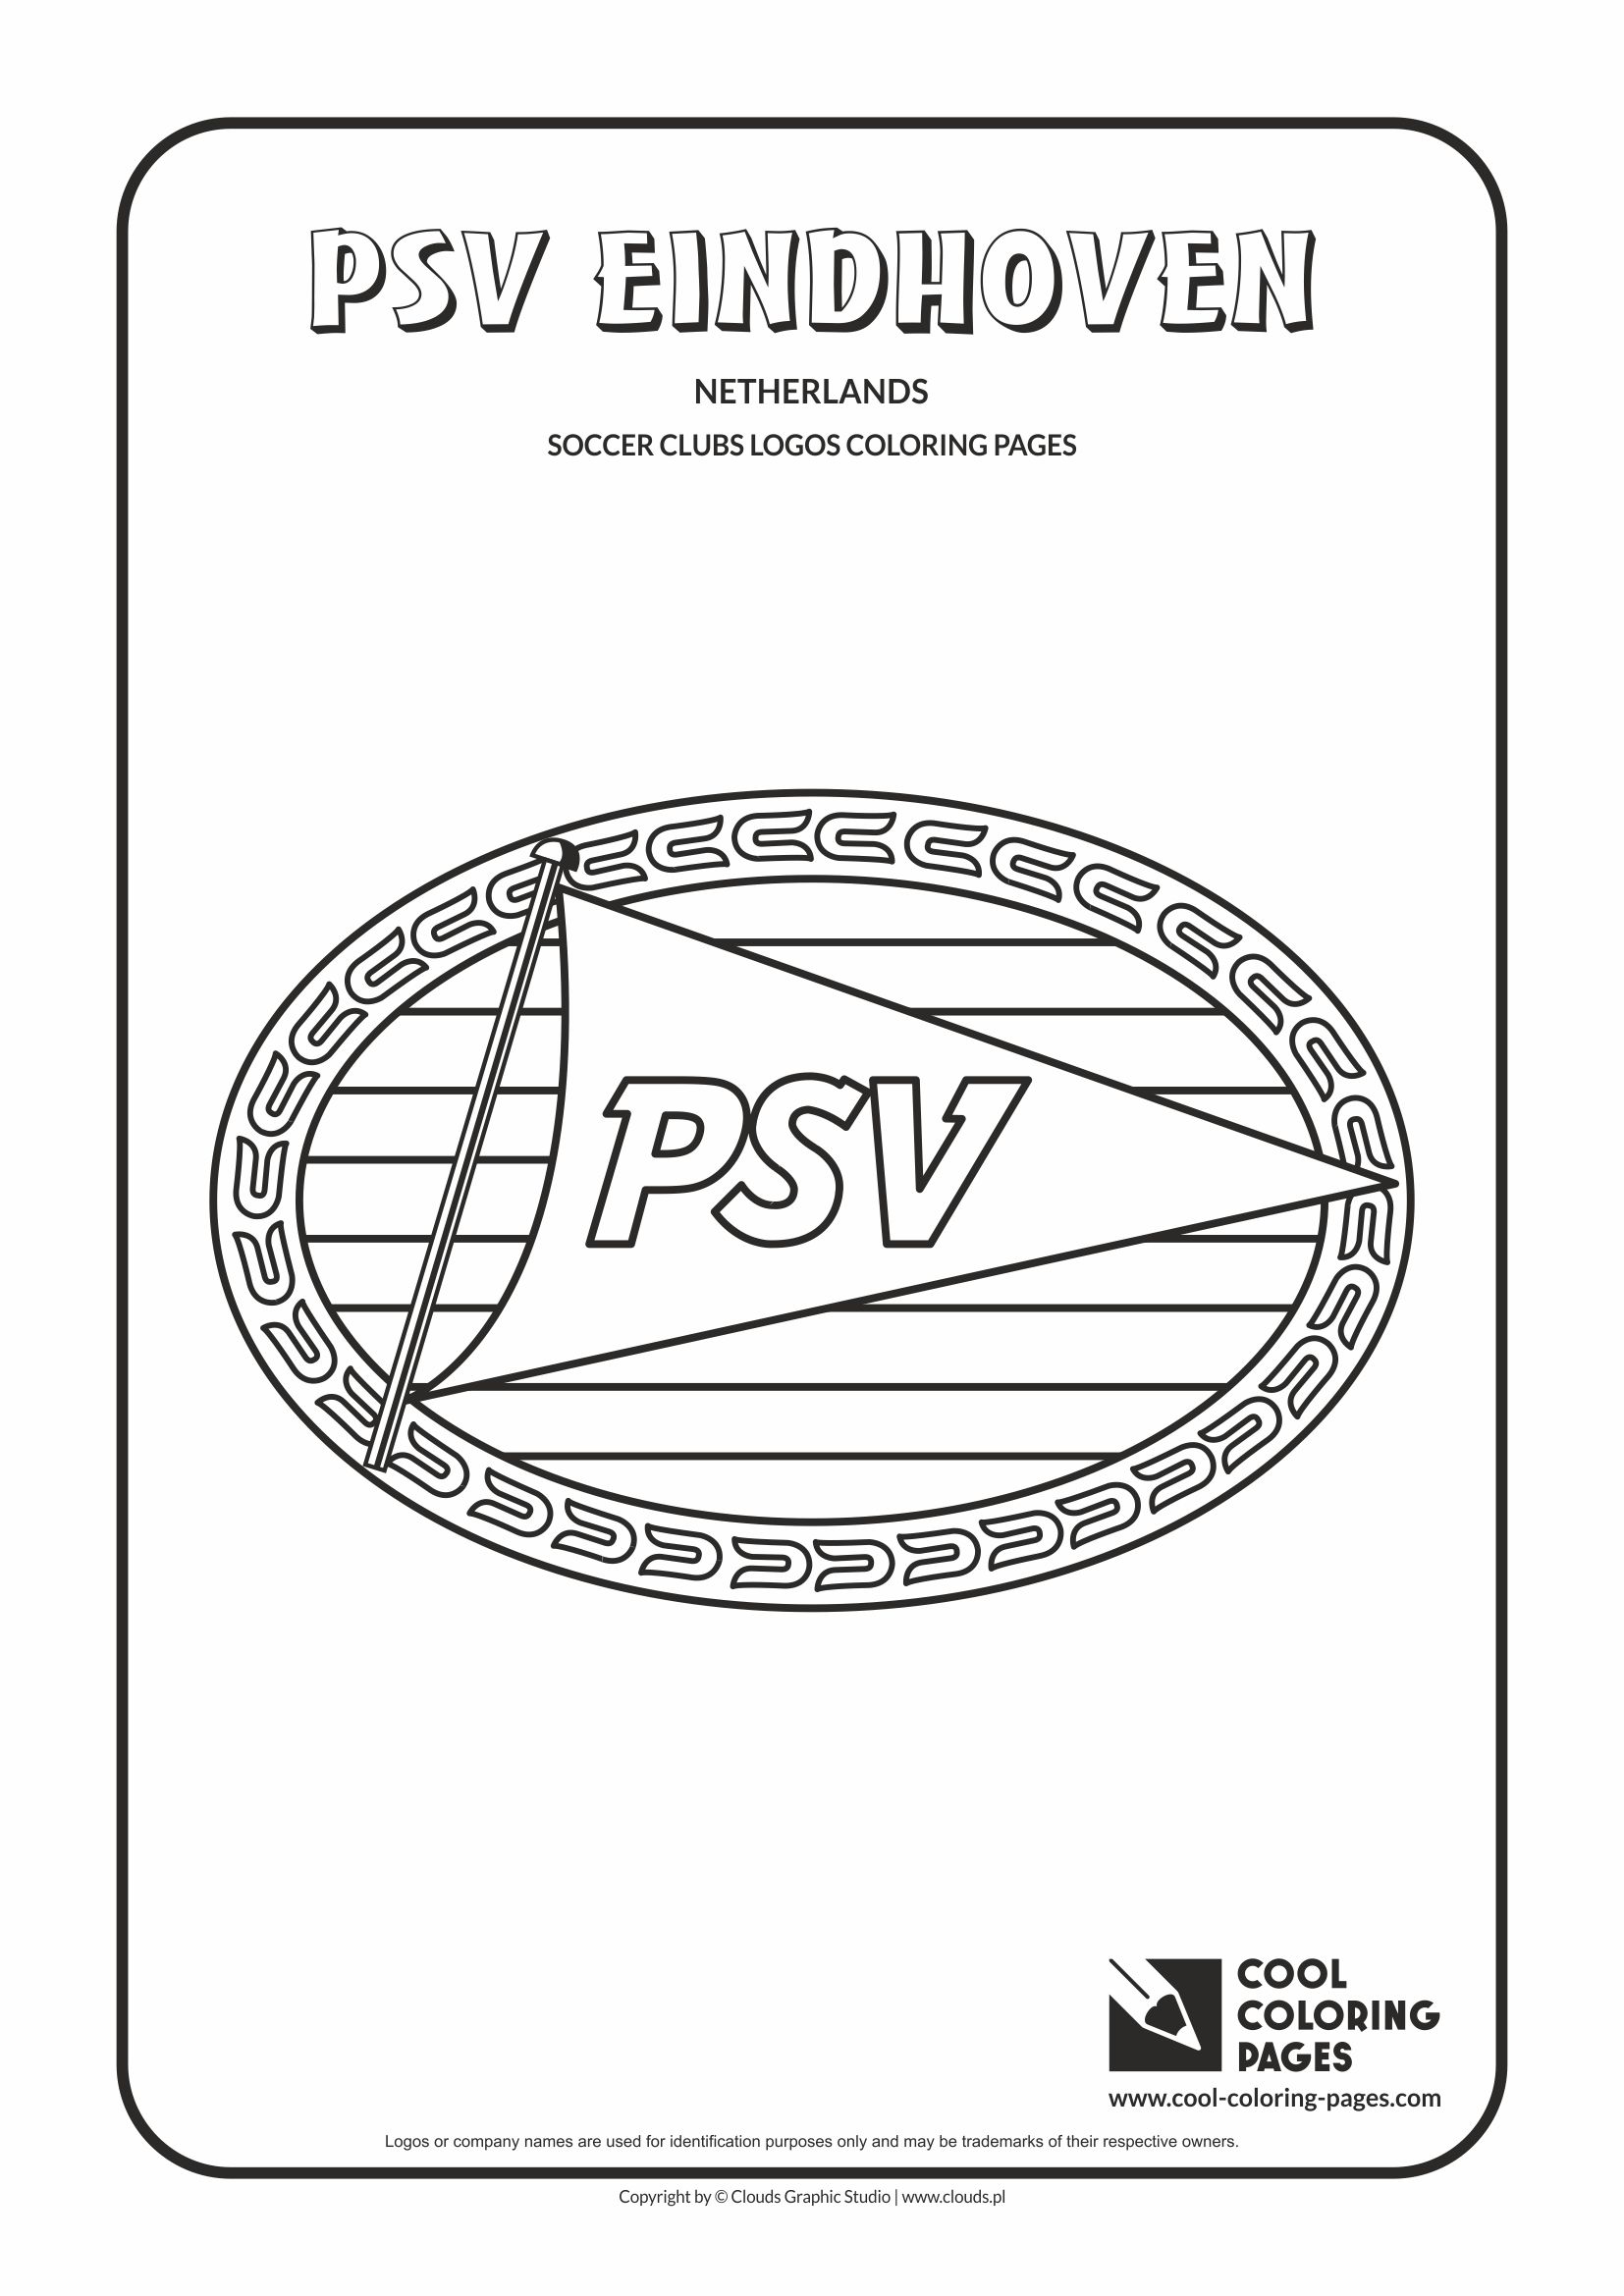 Cool Coloring Pages - Soccer Clubs Logos / PSV Einghoven logo / Coloring page with PSV Einghoven logo